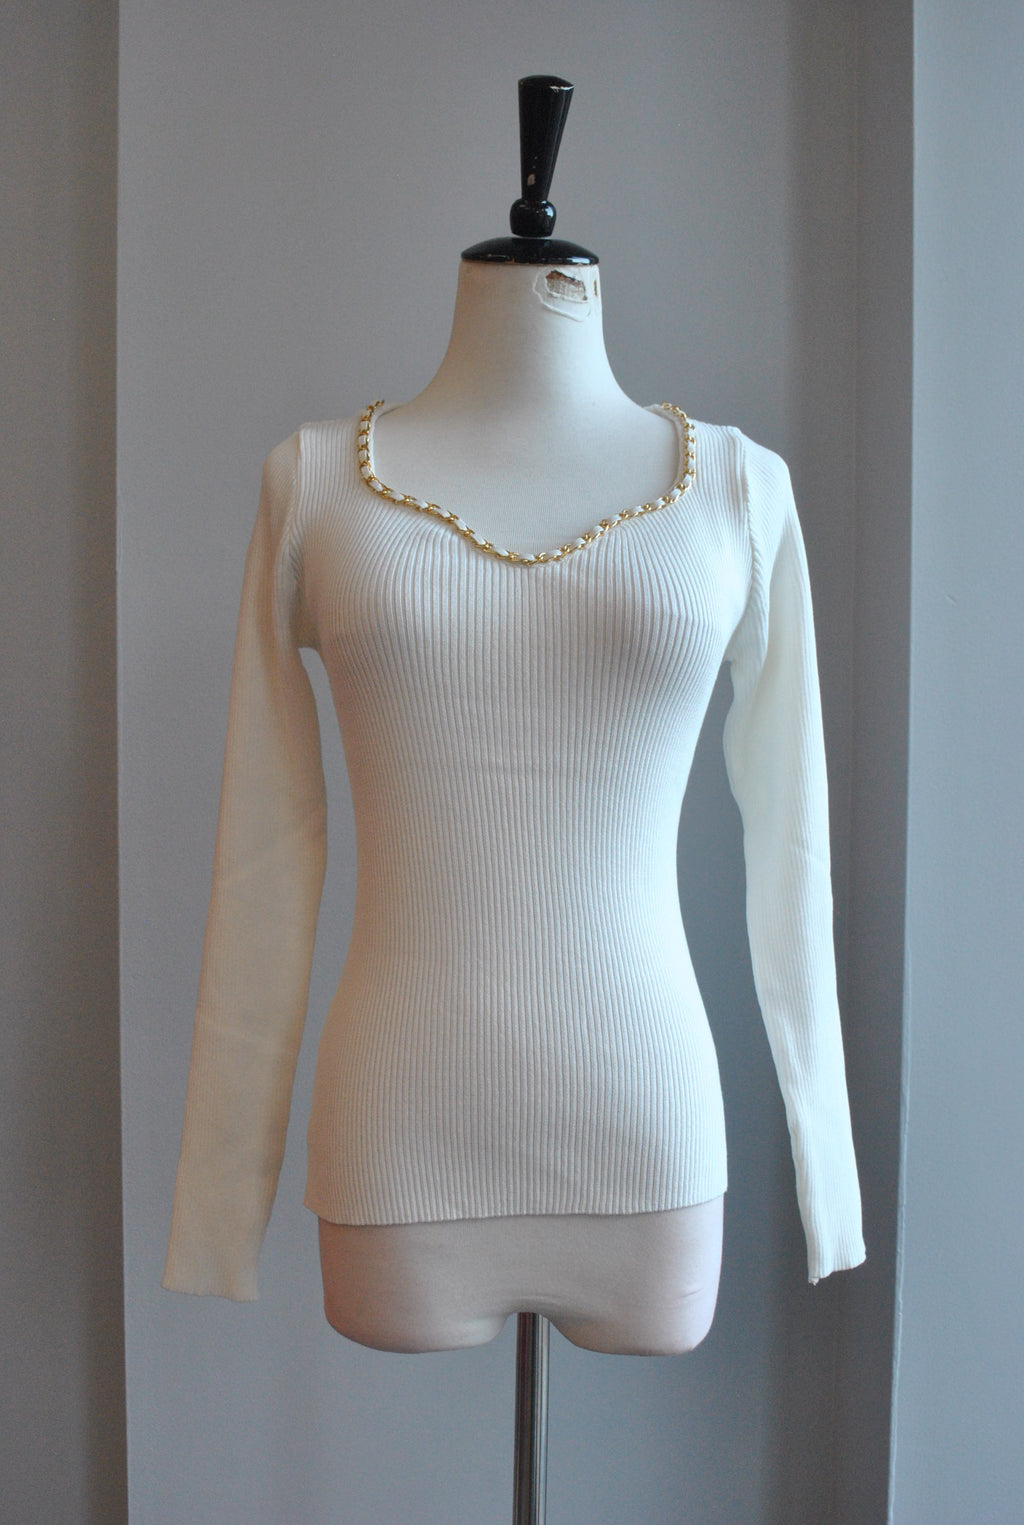 WHITE SWEATER TOP WITH GOLD CHAIN